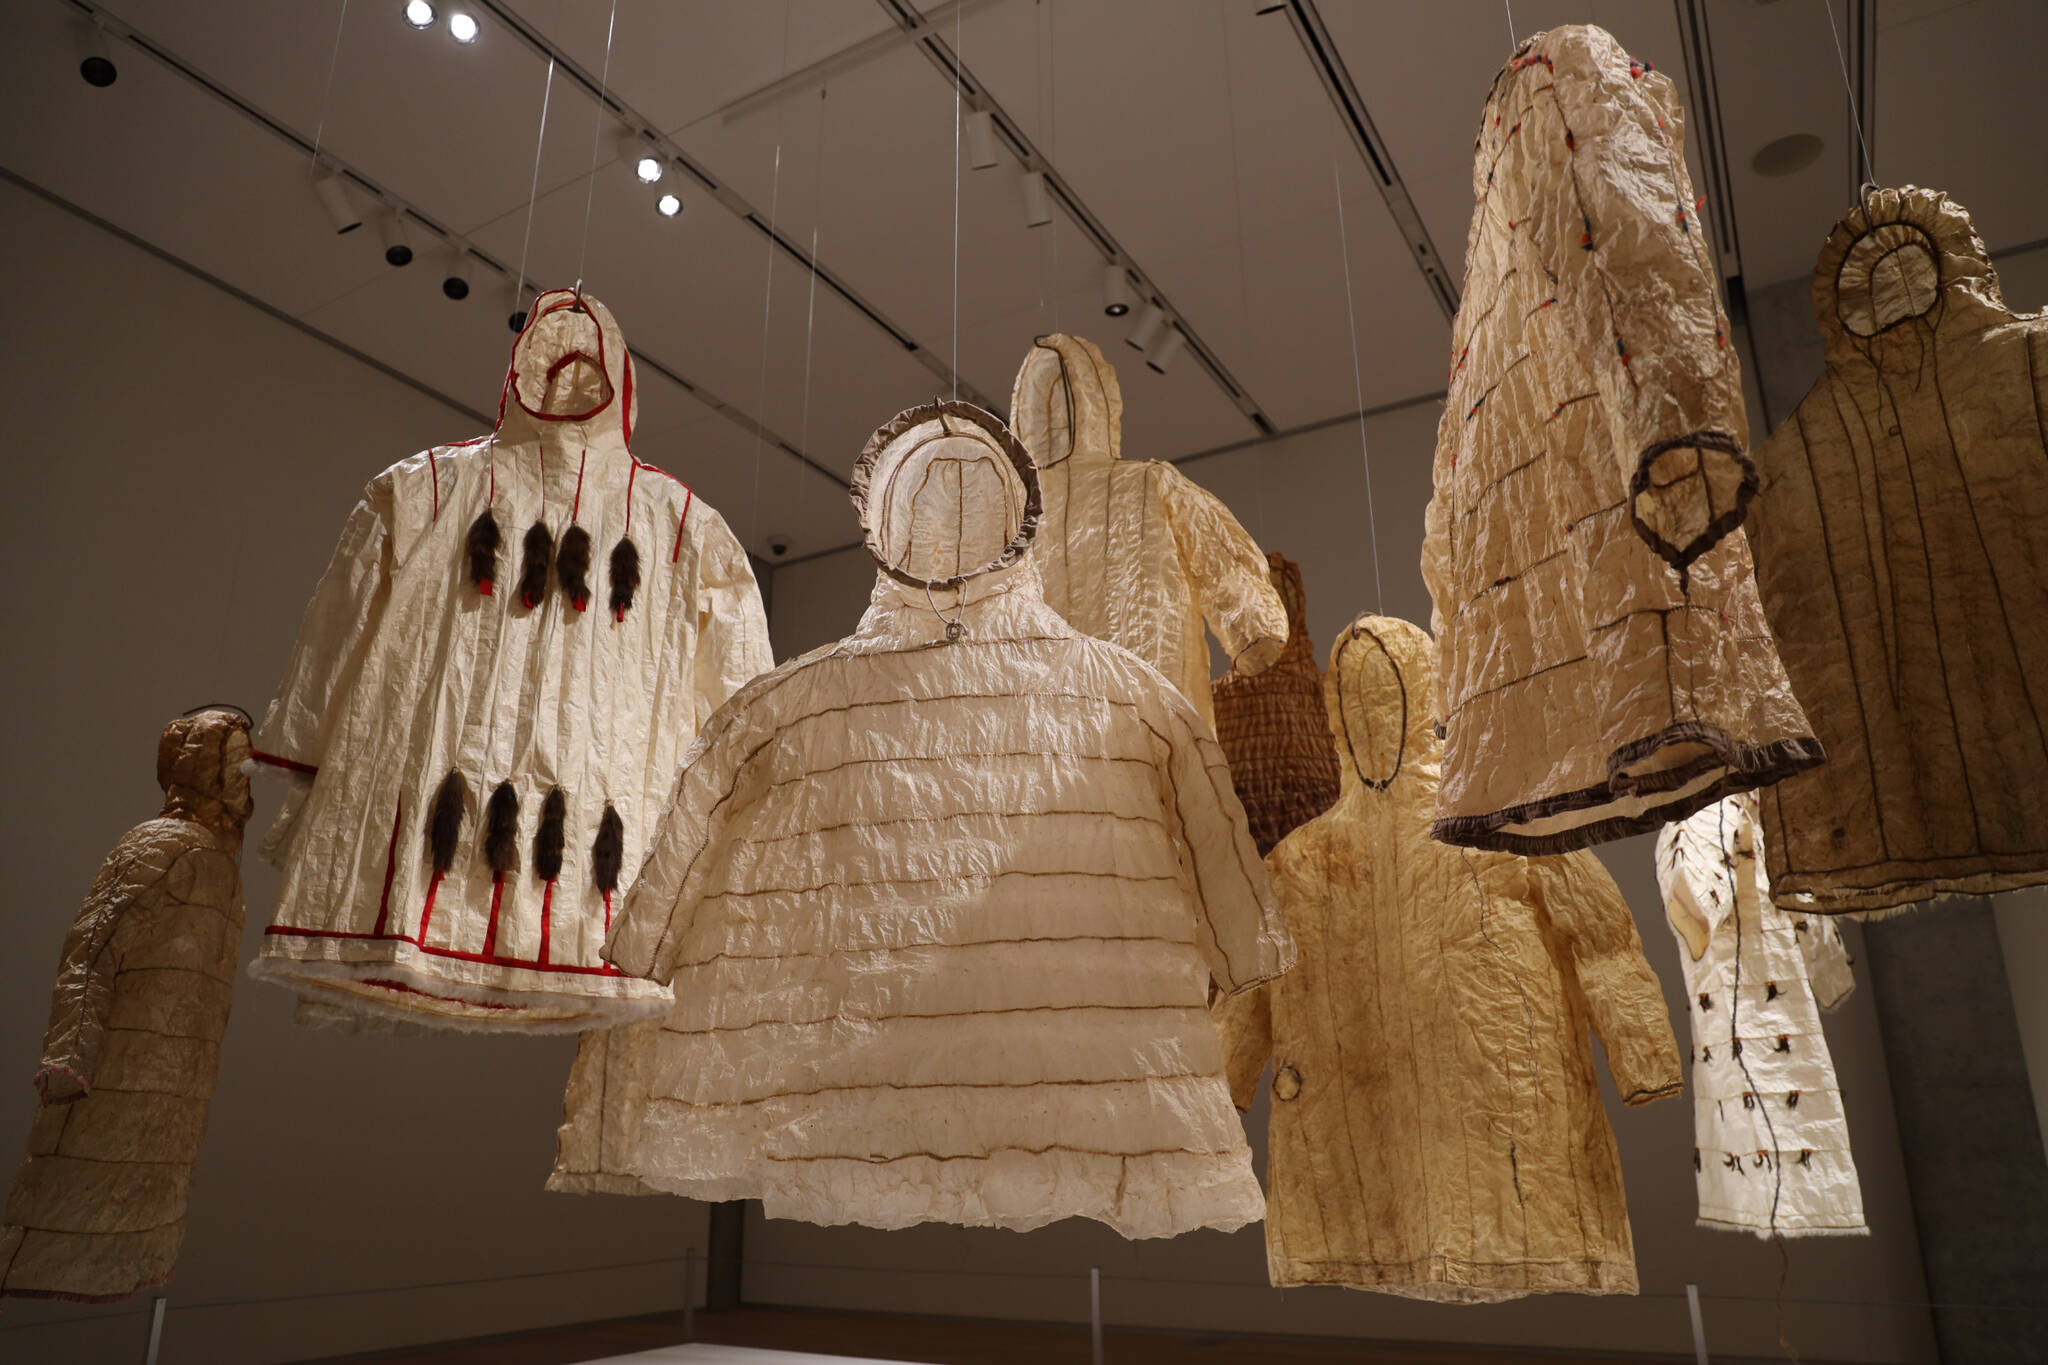 “Gut raincoats” made from animal intestines hang from the ceiling at the the Alaska State Museum’s exhibit “Visceral: Verity, Legacy, Identity – Alaska Native Gut Knowledge & Perseverance.” The Visceral trilogy of exhibitions displayed at the museum will be open for viewing throughout the summer. (Clarise Larson / Juneau Empire)